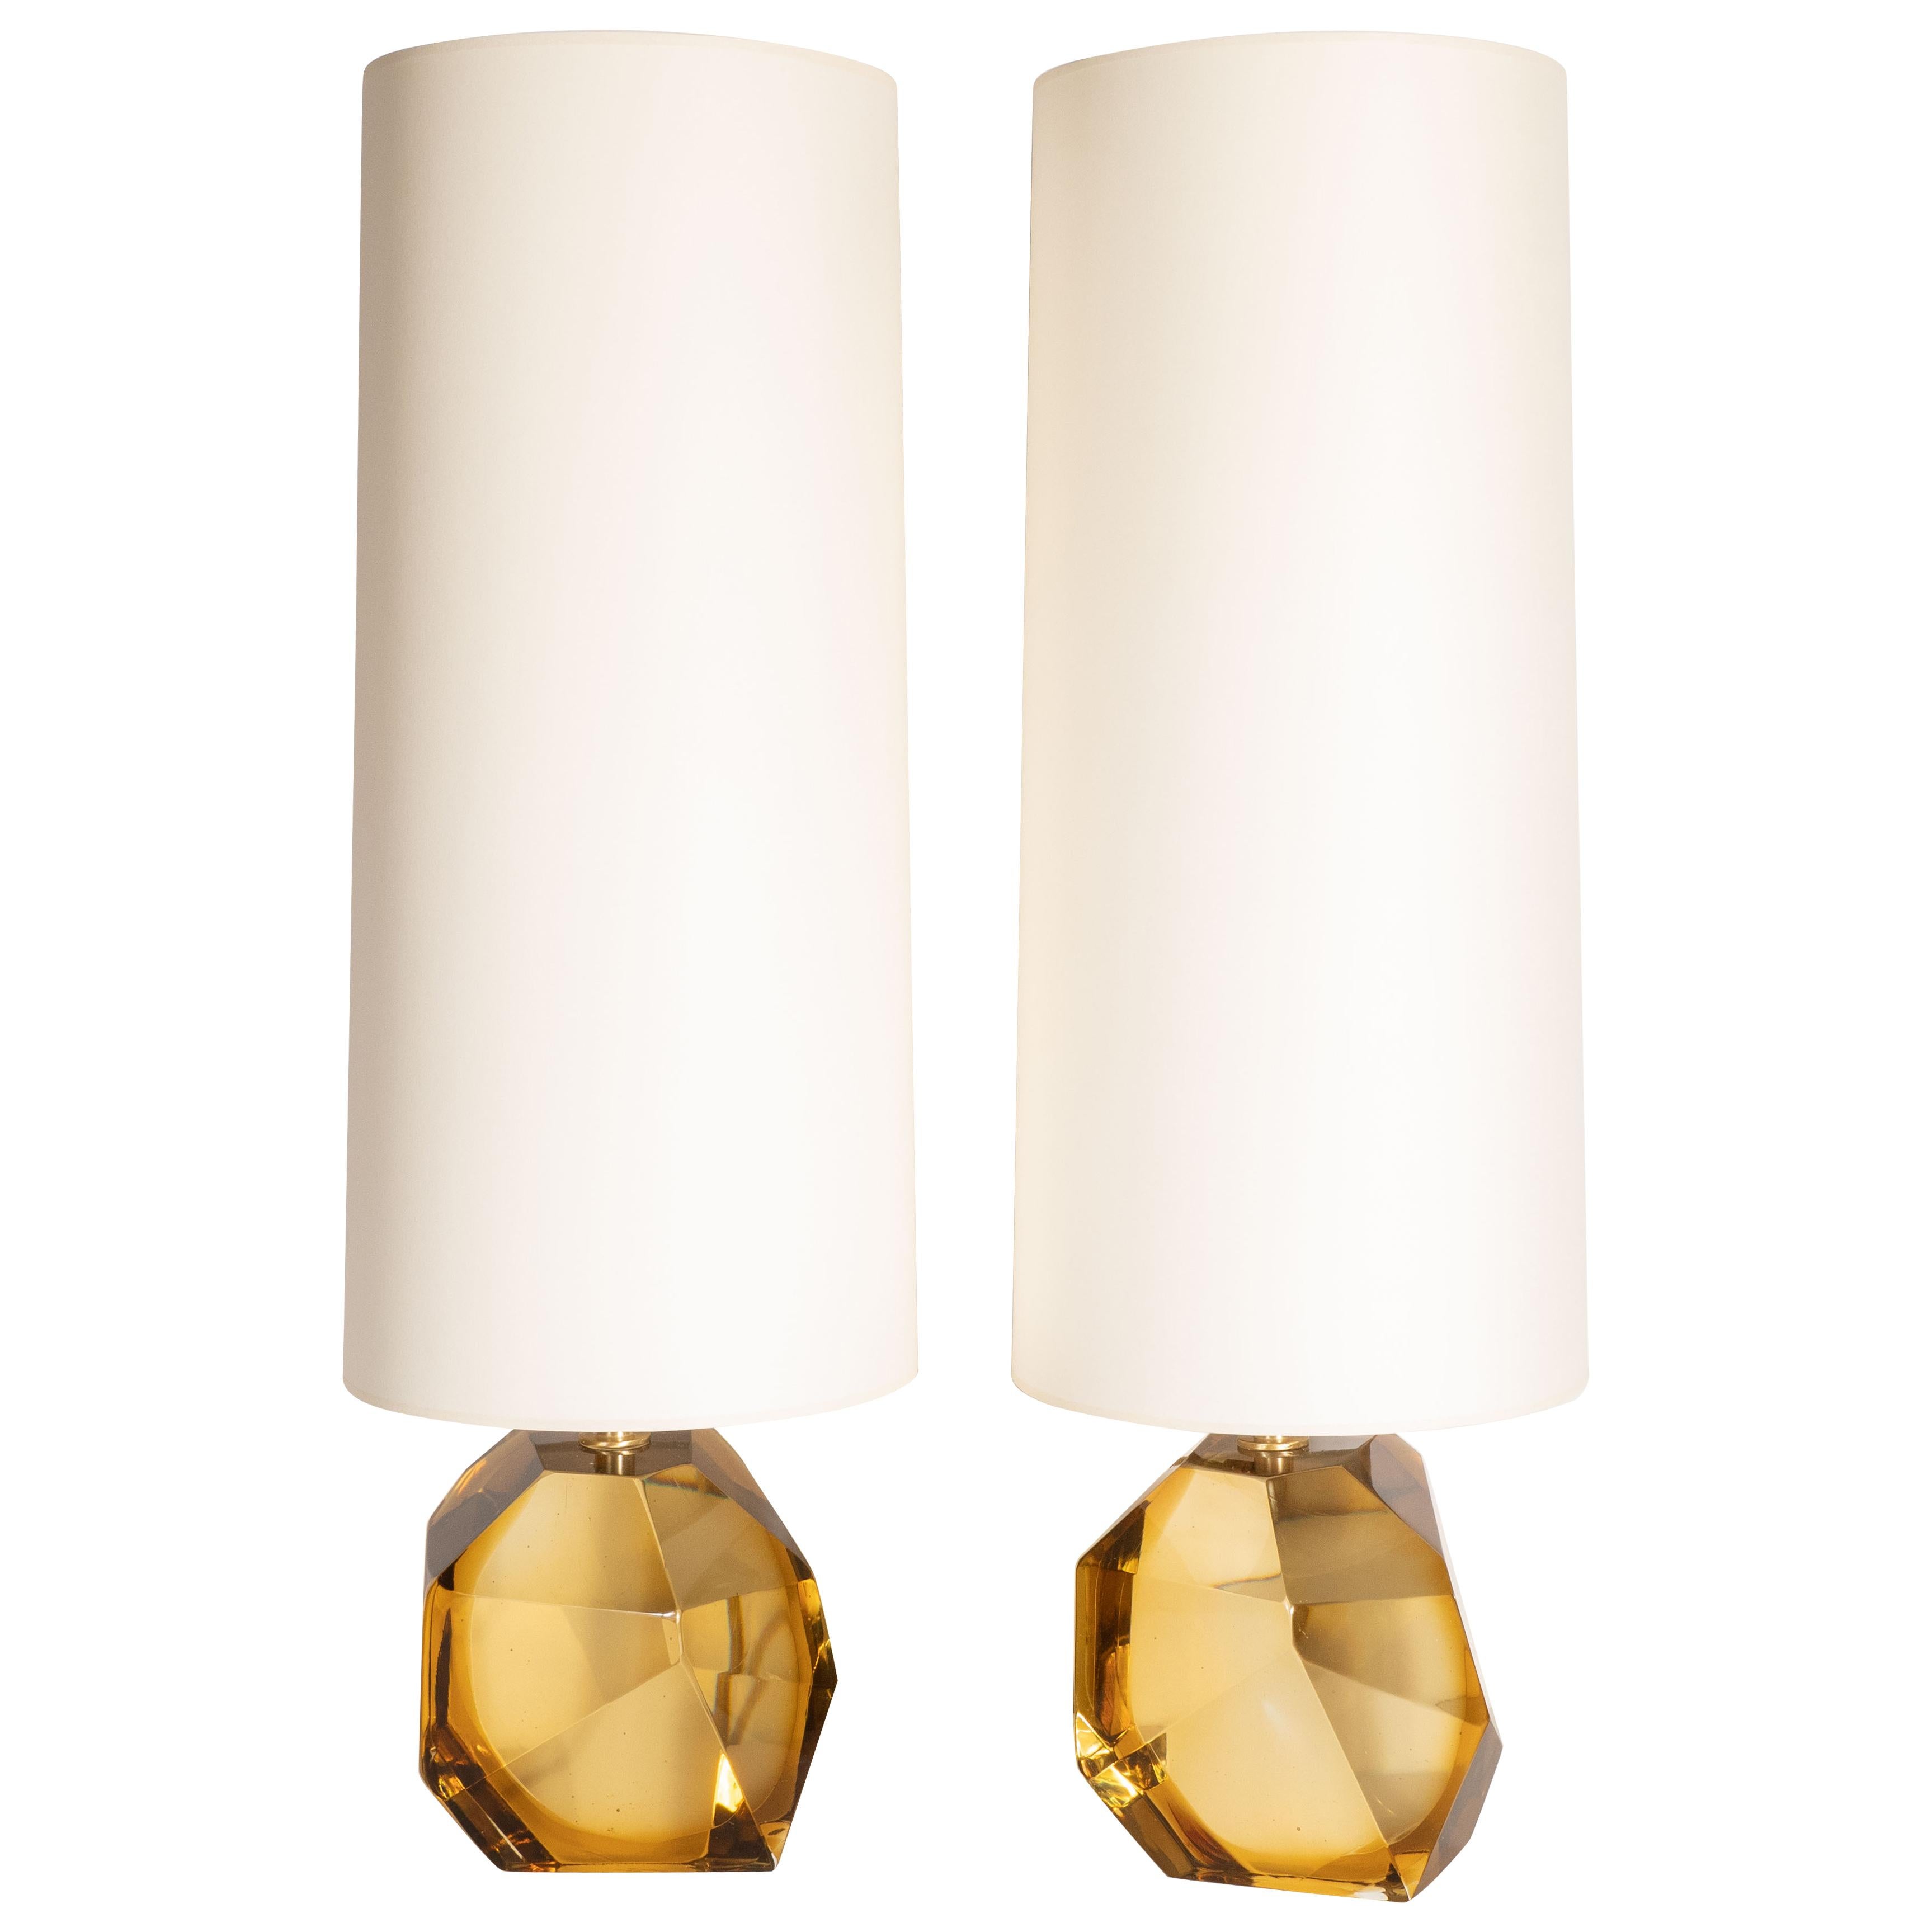 Modernist Faceted Handblown Murano Topaz Glass Table Lamps